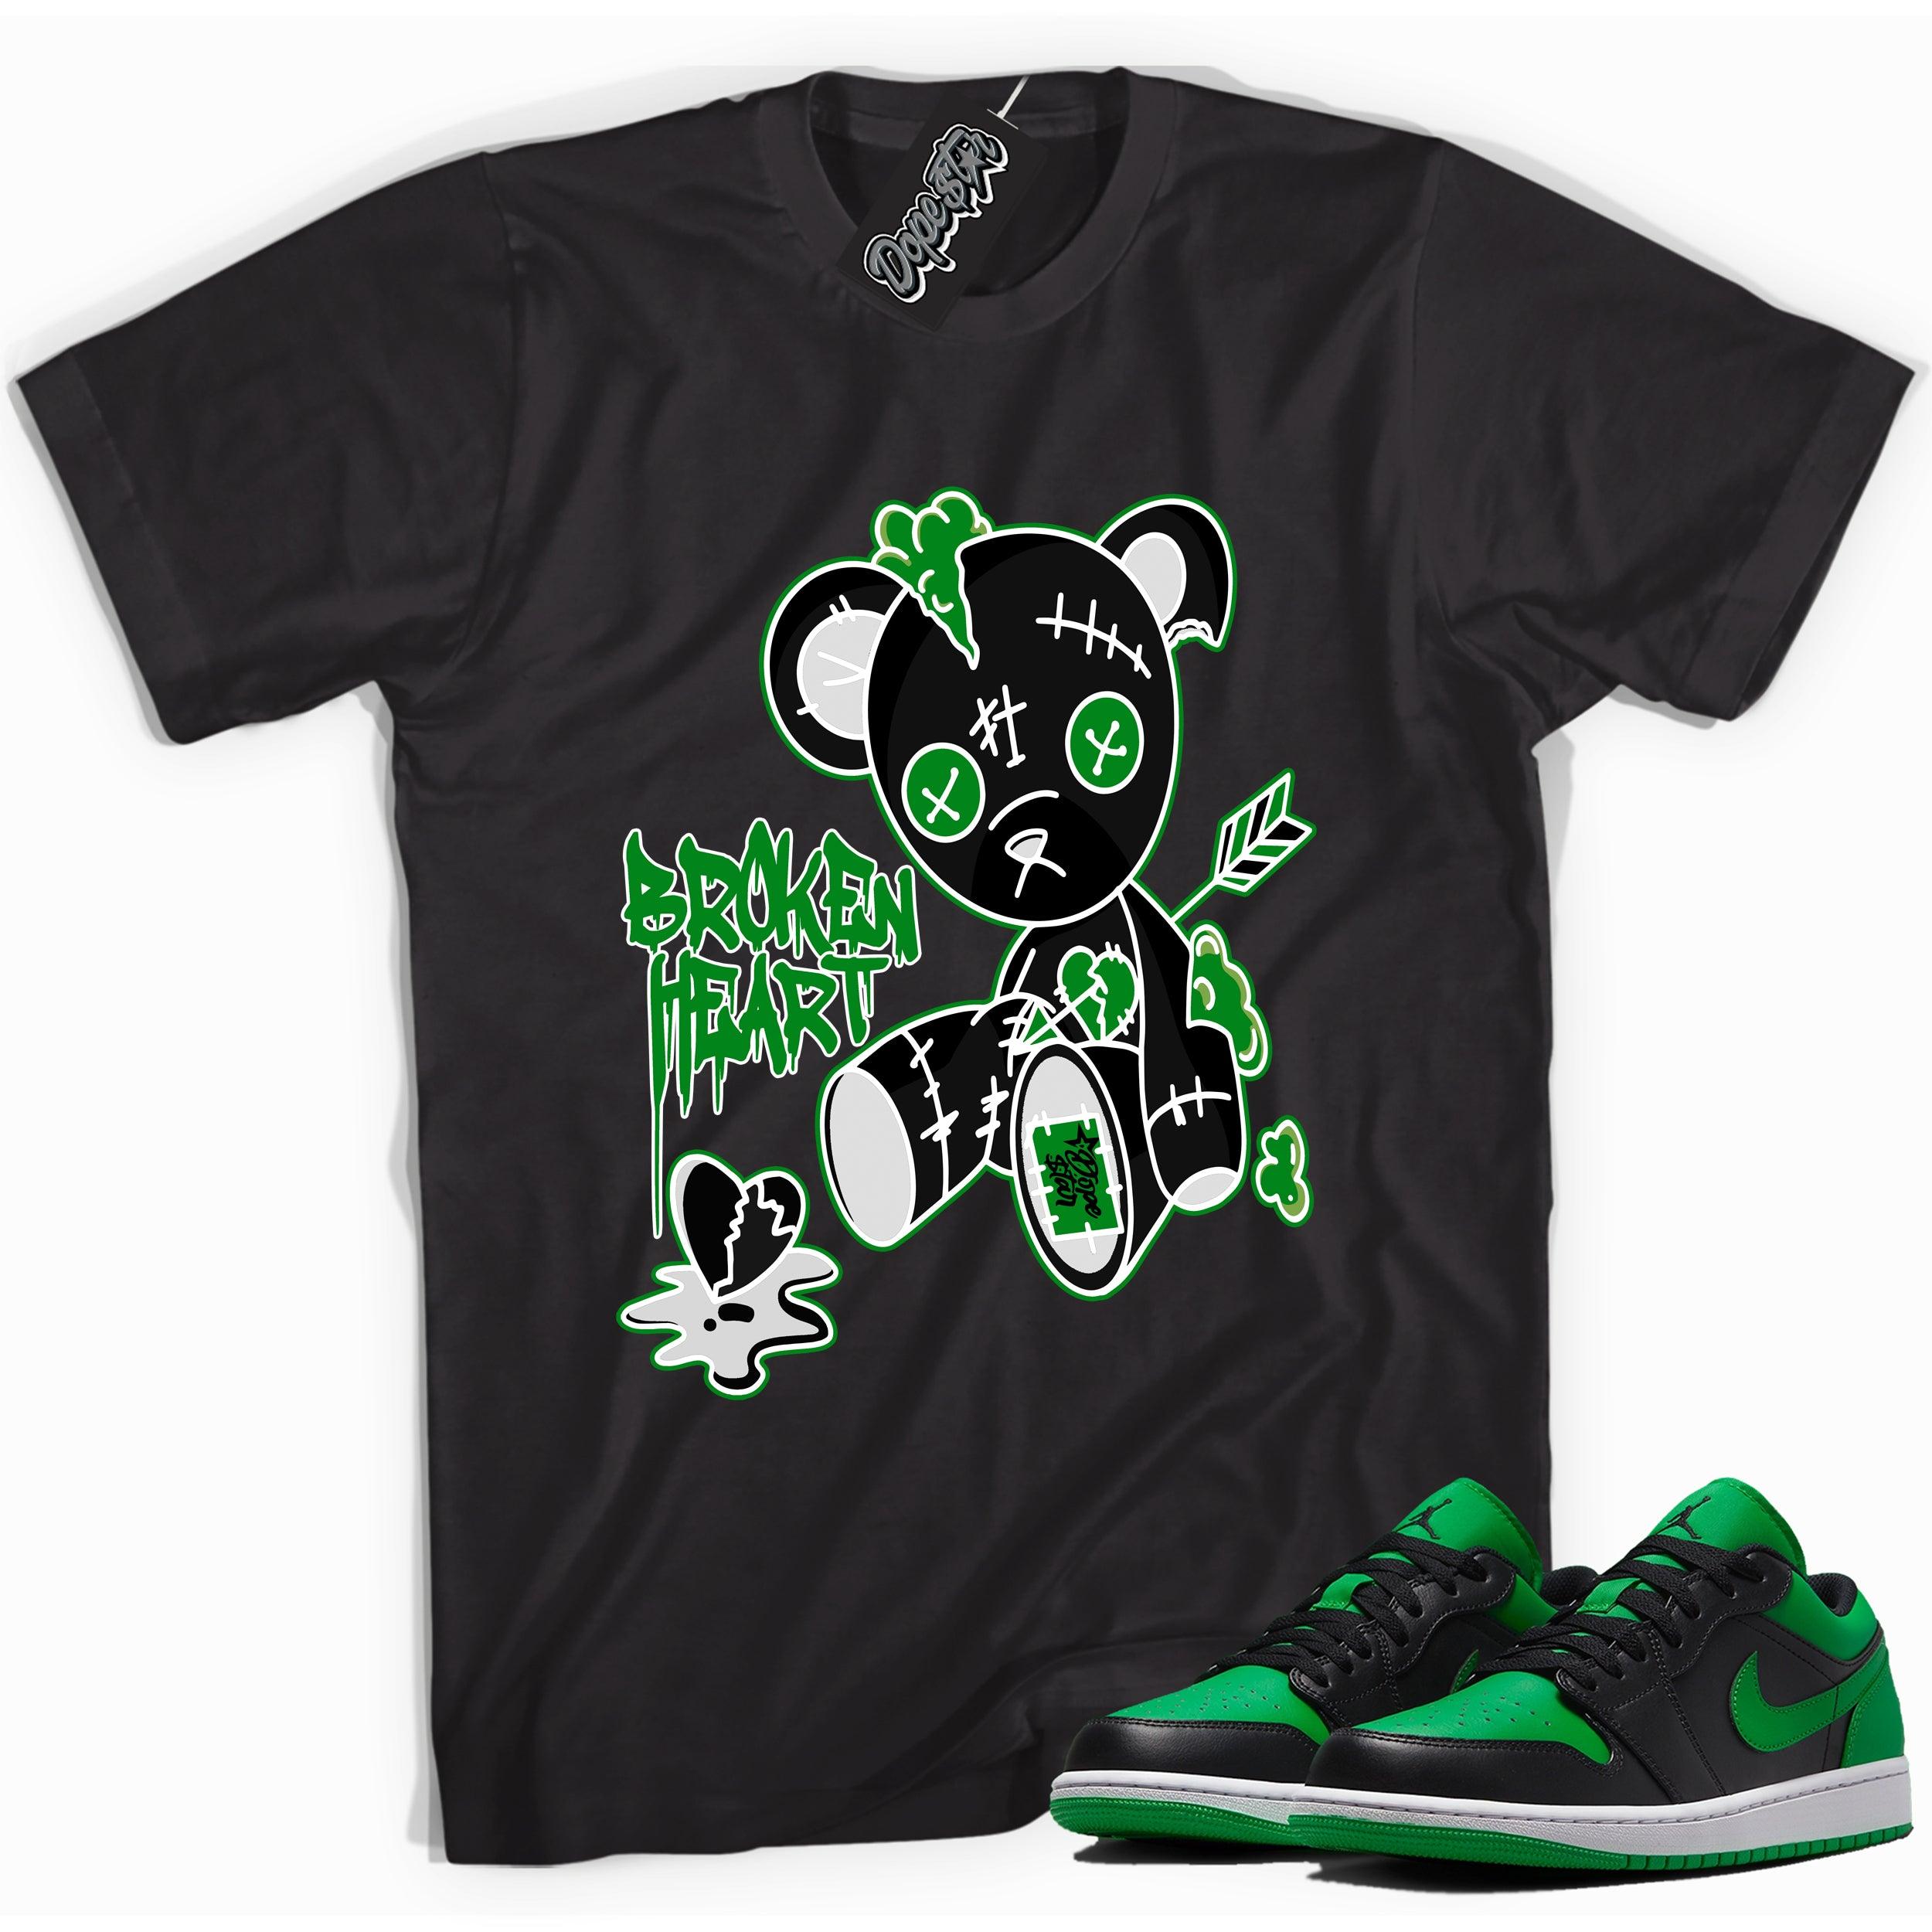 Cool black graphic tee with 'Broken Heart Bear' print, that perfectly matches Air Jordan 1 Low Lucky Green sneakers